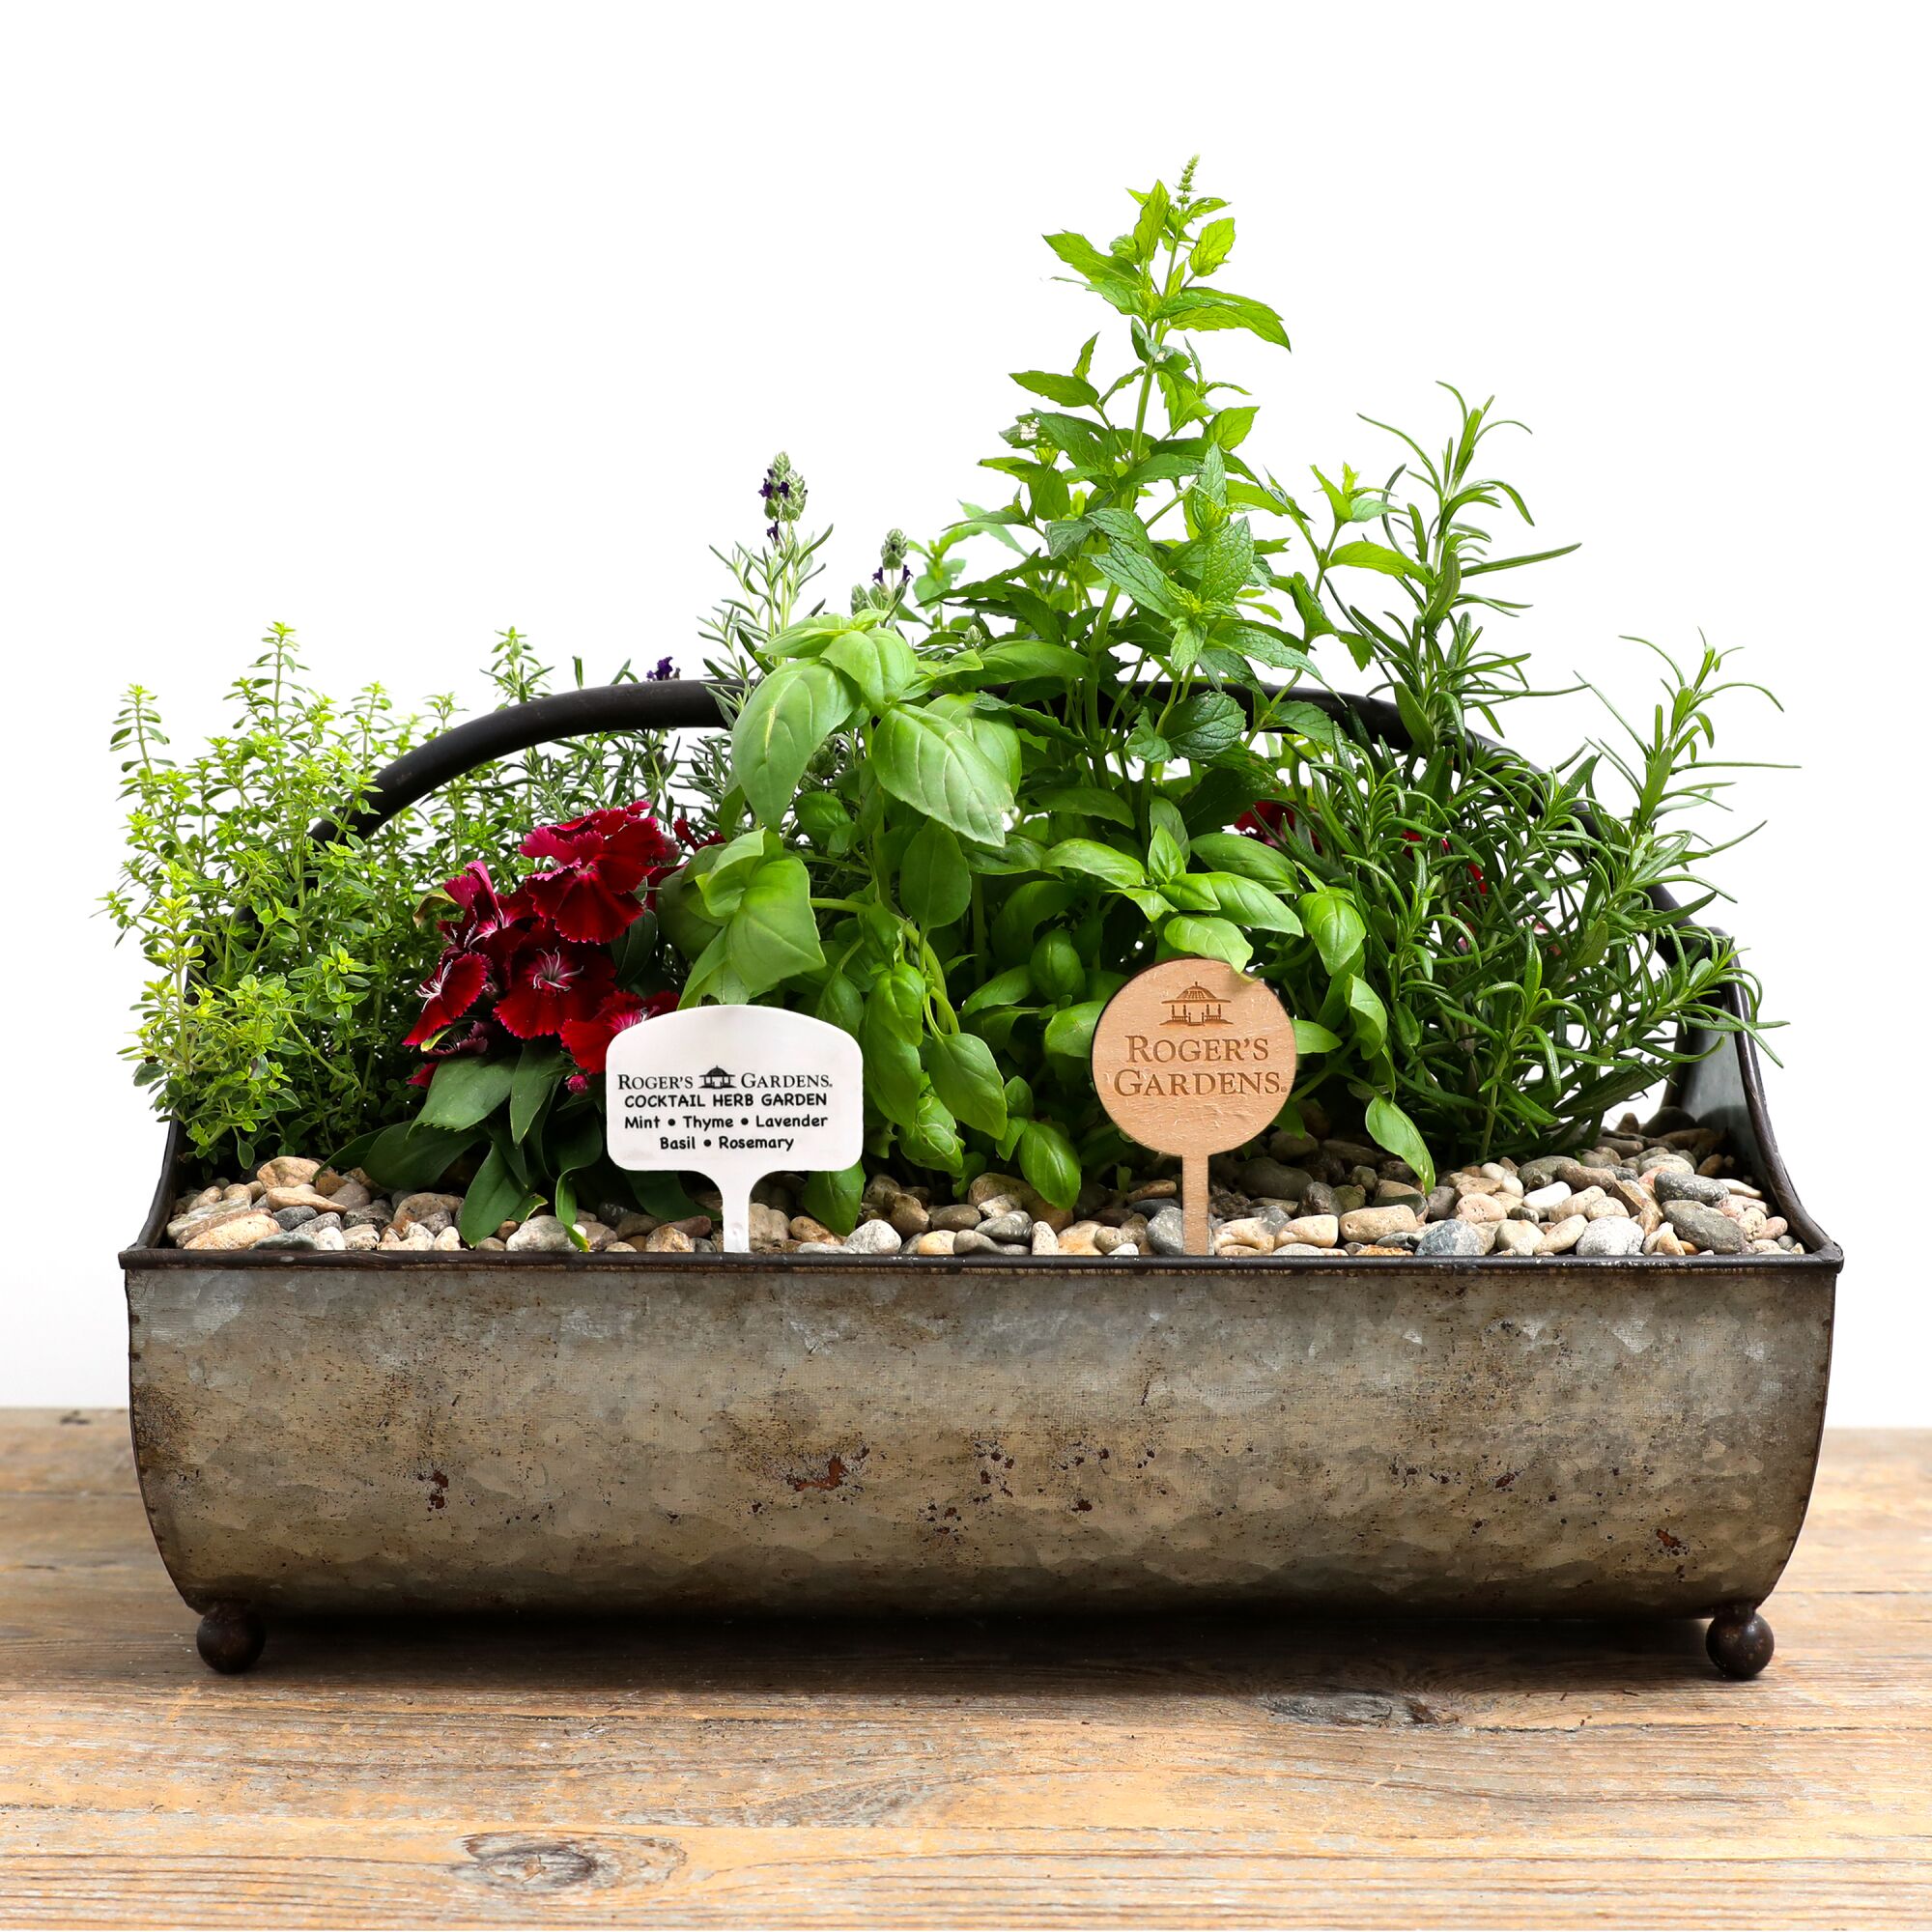 A plant-filled garden in a tray.